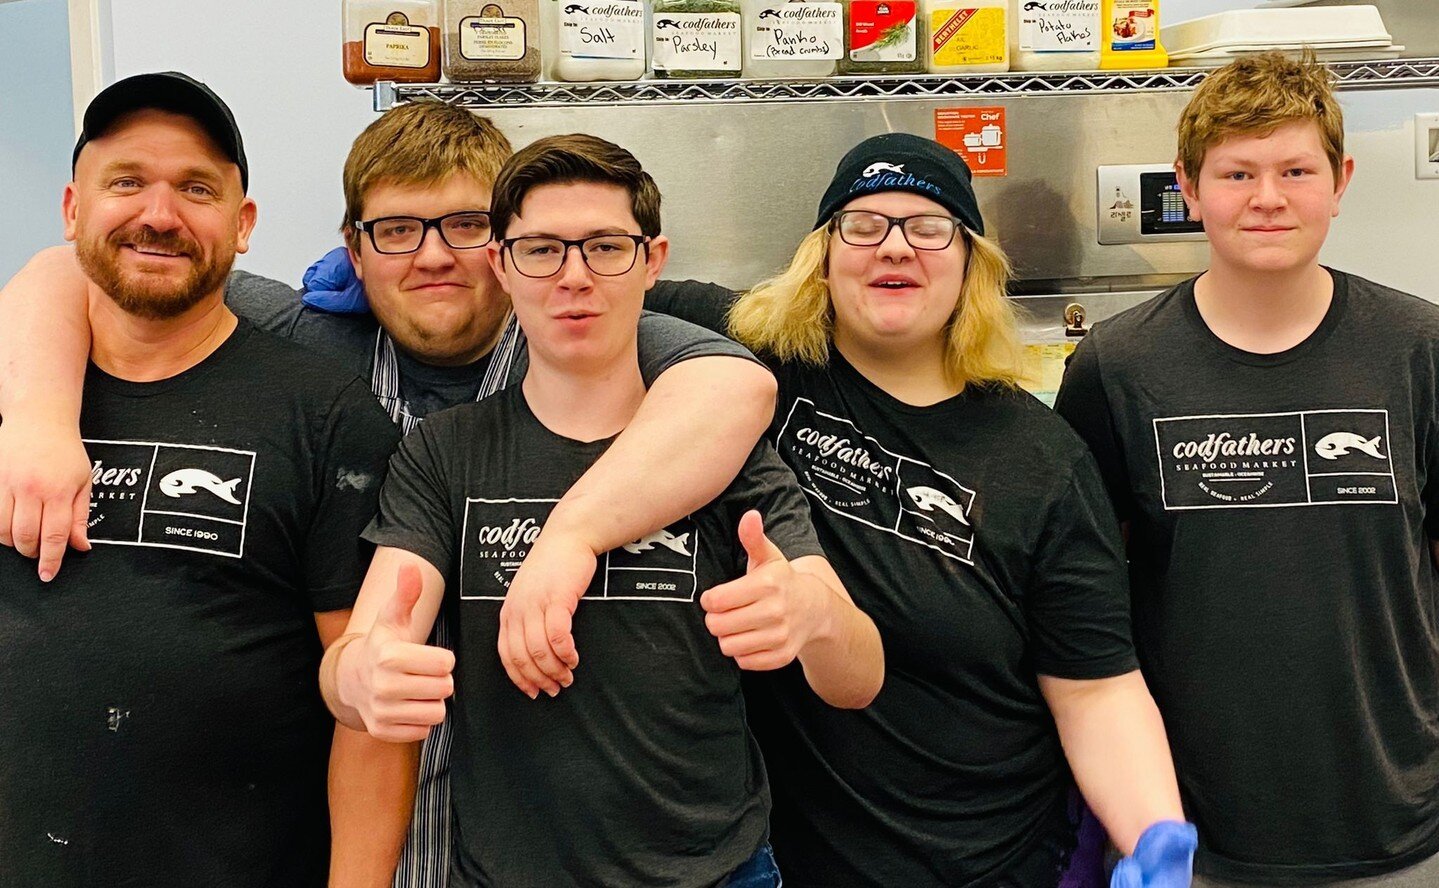 Have a wonderful long weekend!

This crew is here to help you make delicious seafood decisions!

Open today till 6pm, tomorrow 11 am to 6 pm, Monday 9 am to 6 pm.

See you soon! 

#Codfathers #Fishmongers #OkaganaEats #KelownaEats #BuyBC #BuyLocal #E